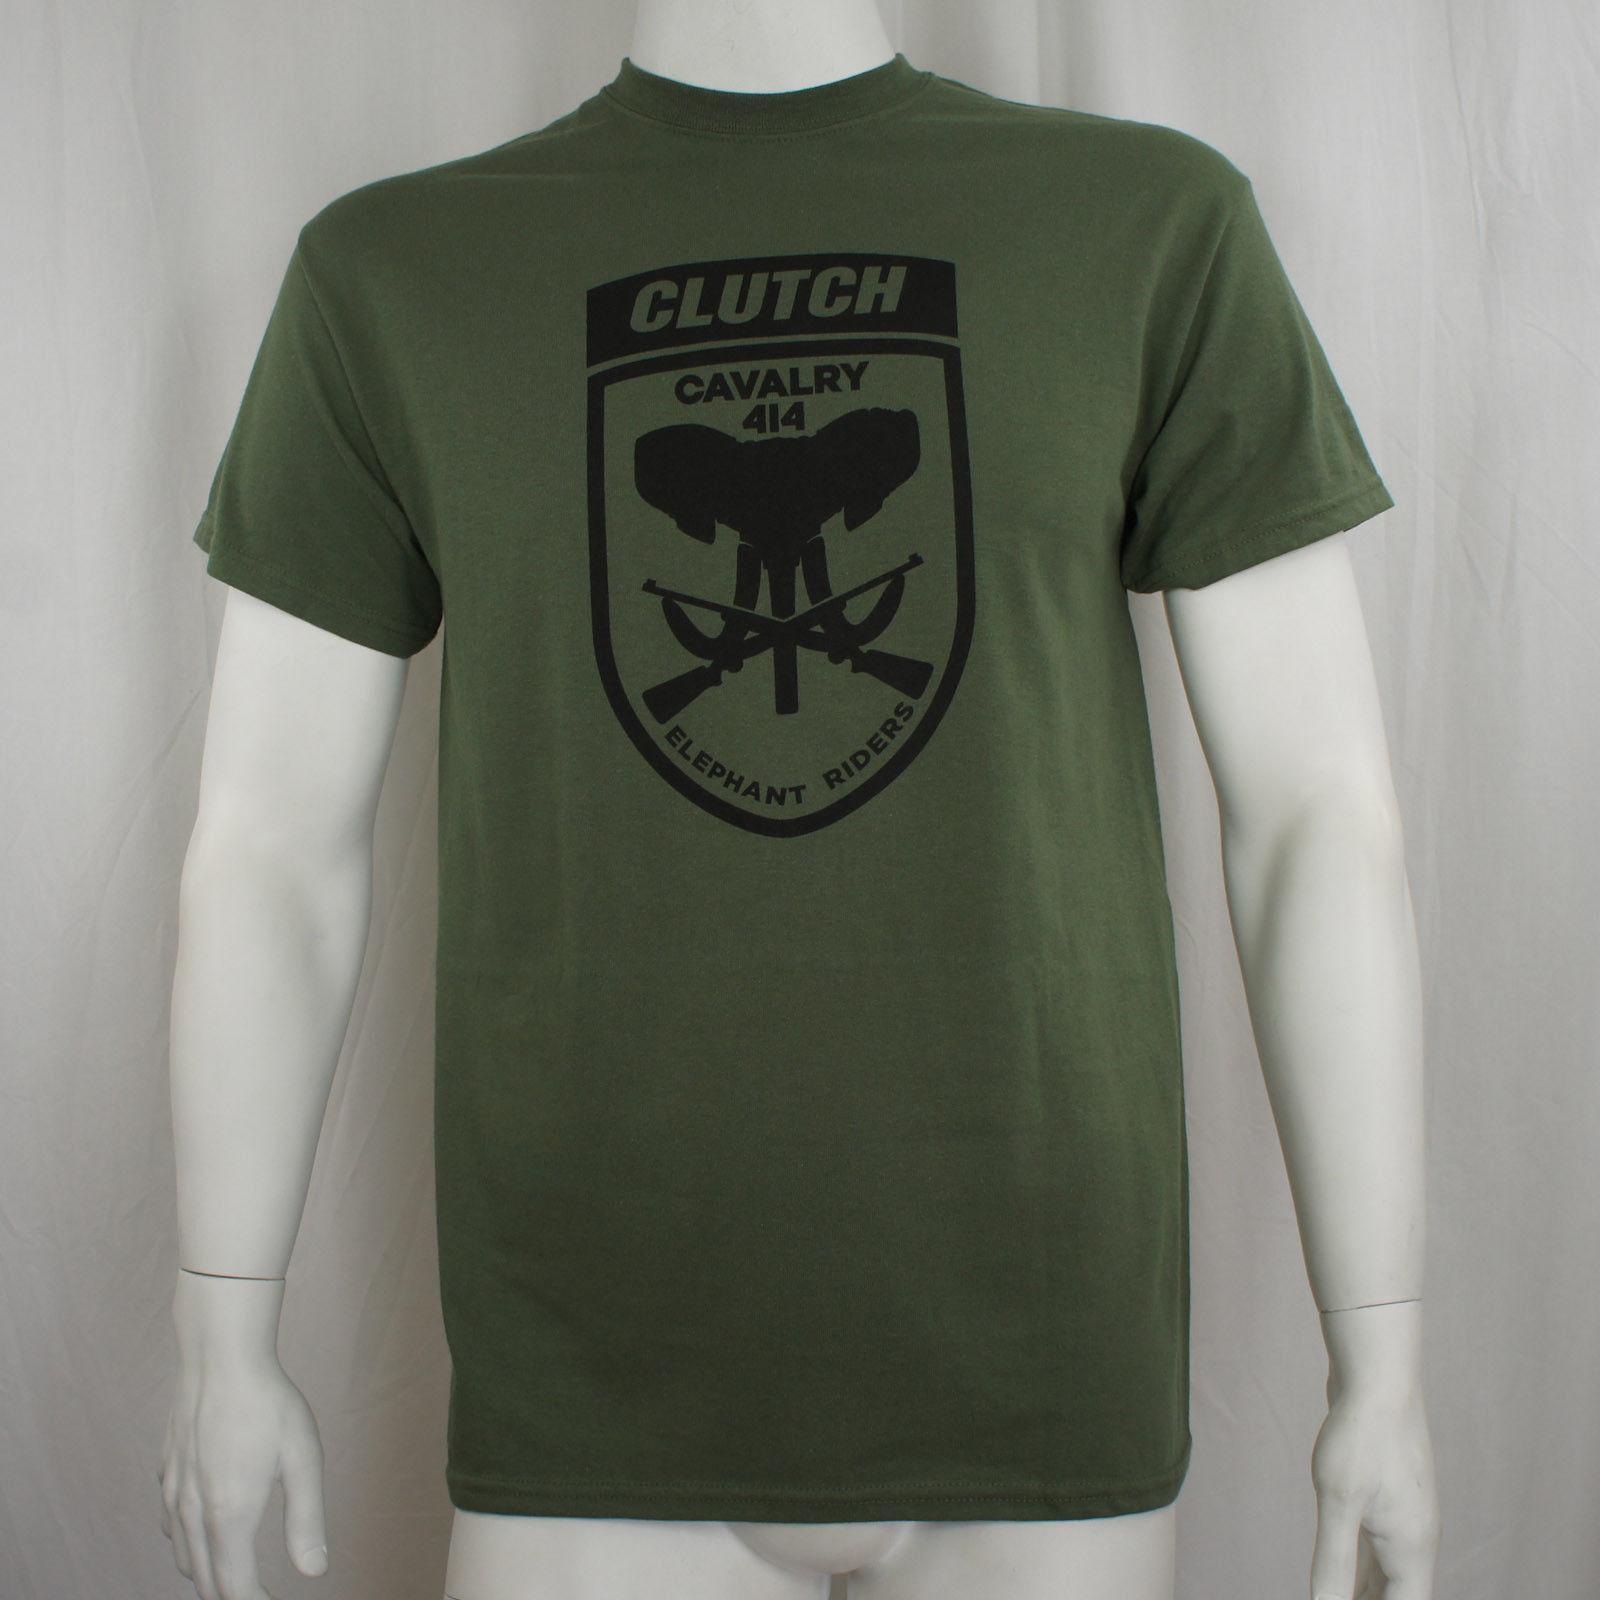 Clutch Band Logo - Authentic CLUTCH Band Elephant Riders Logo Olive Green T Shirt S 3XL ...